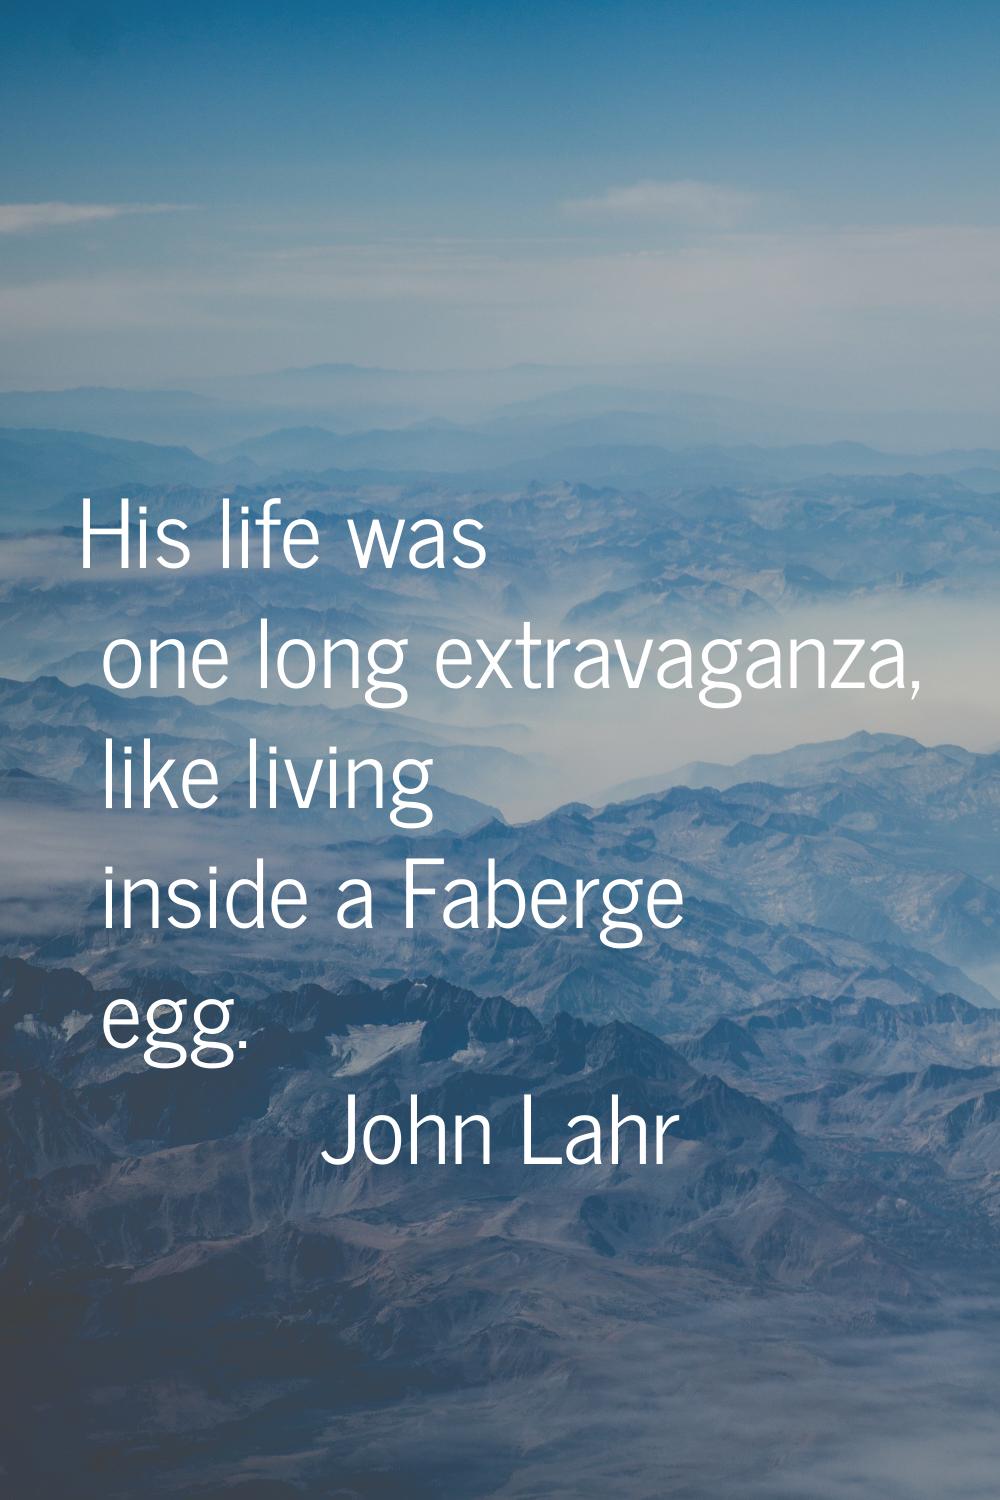 His life was one long extravaganza, like living inside a Faberge egg.